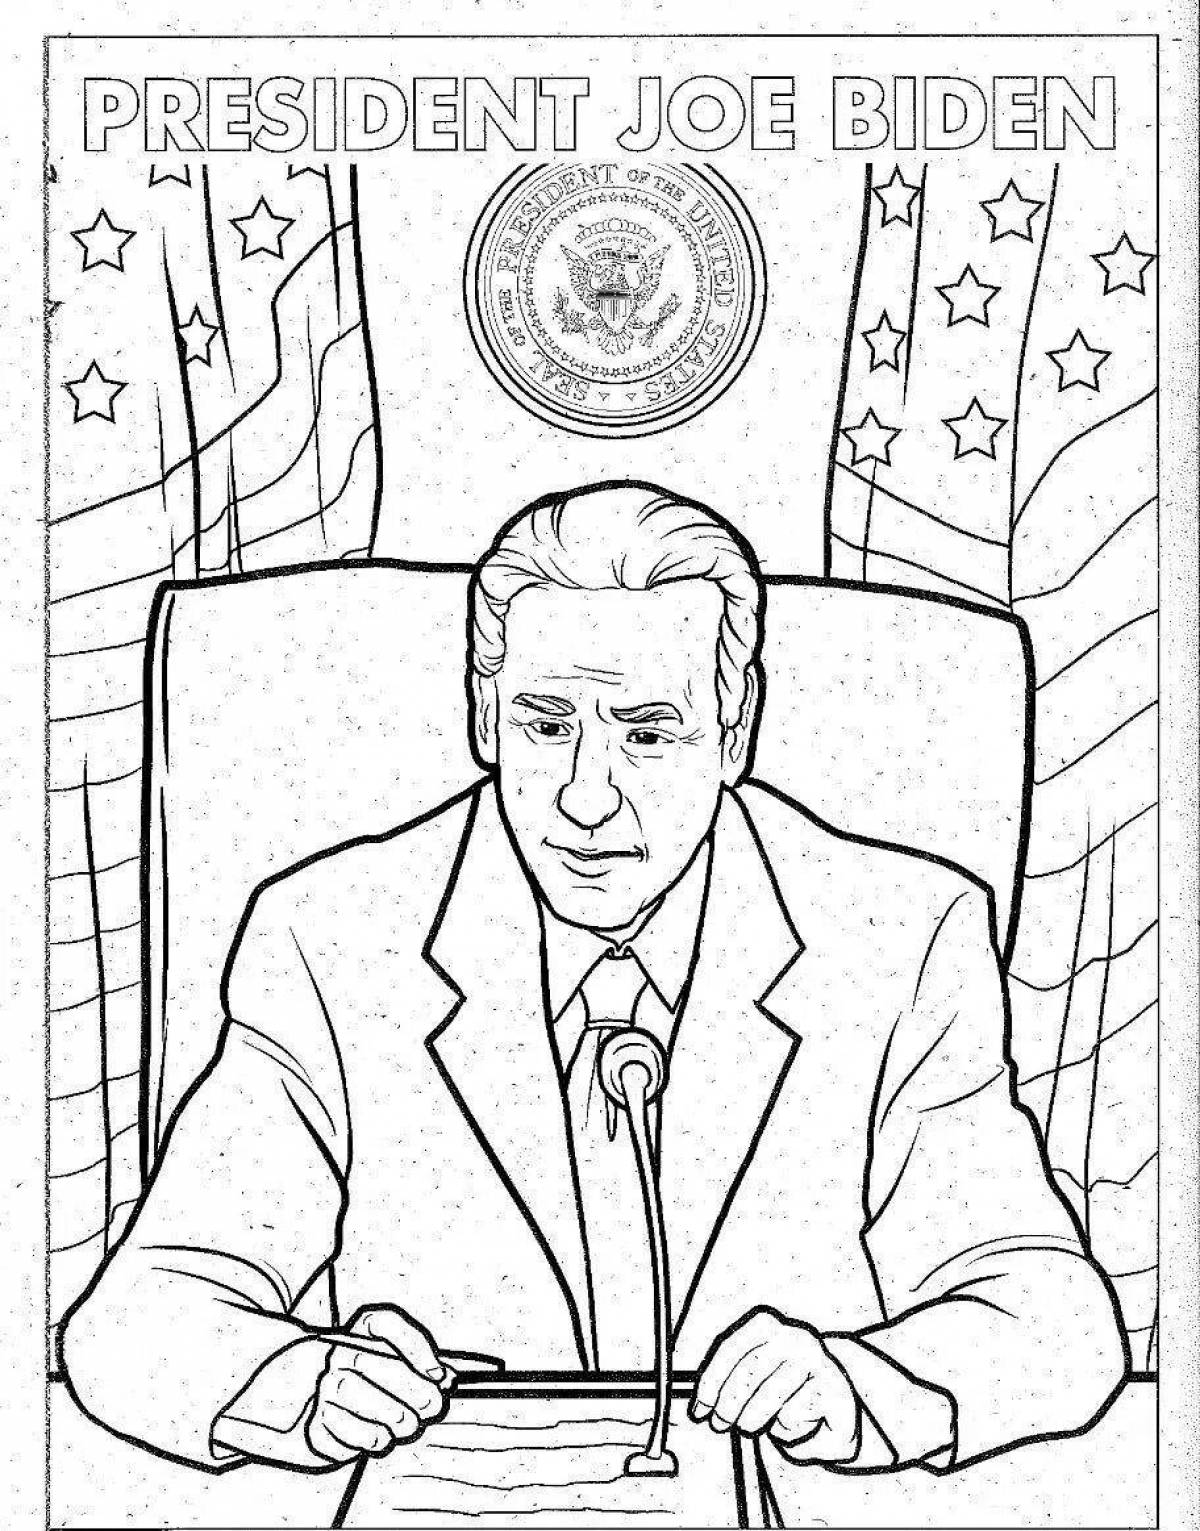 Live coloring of the president